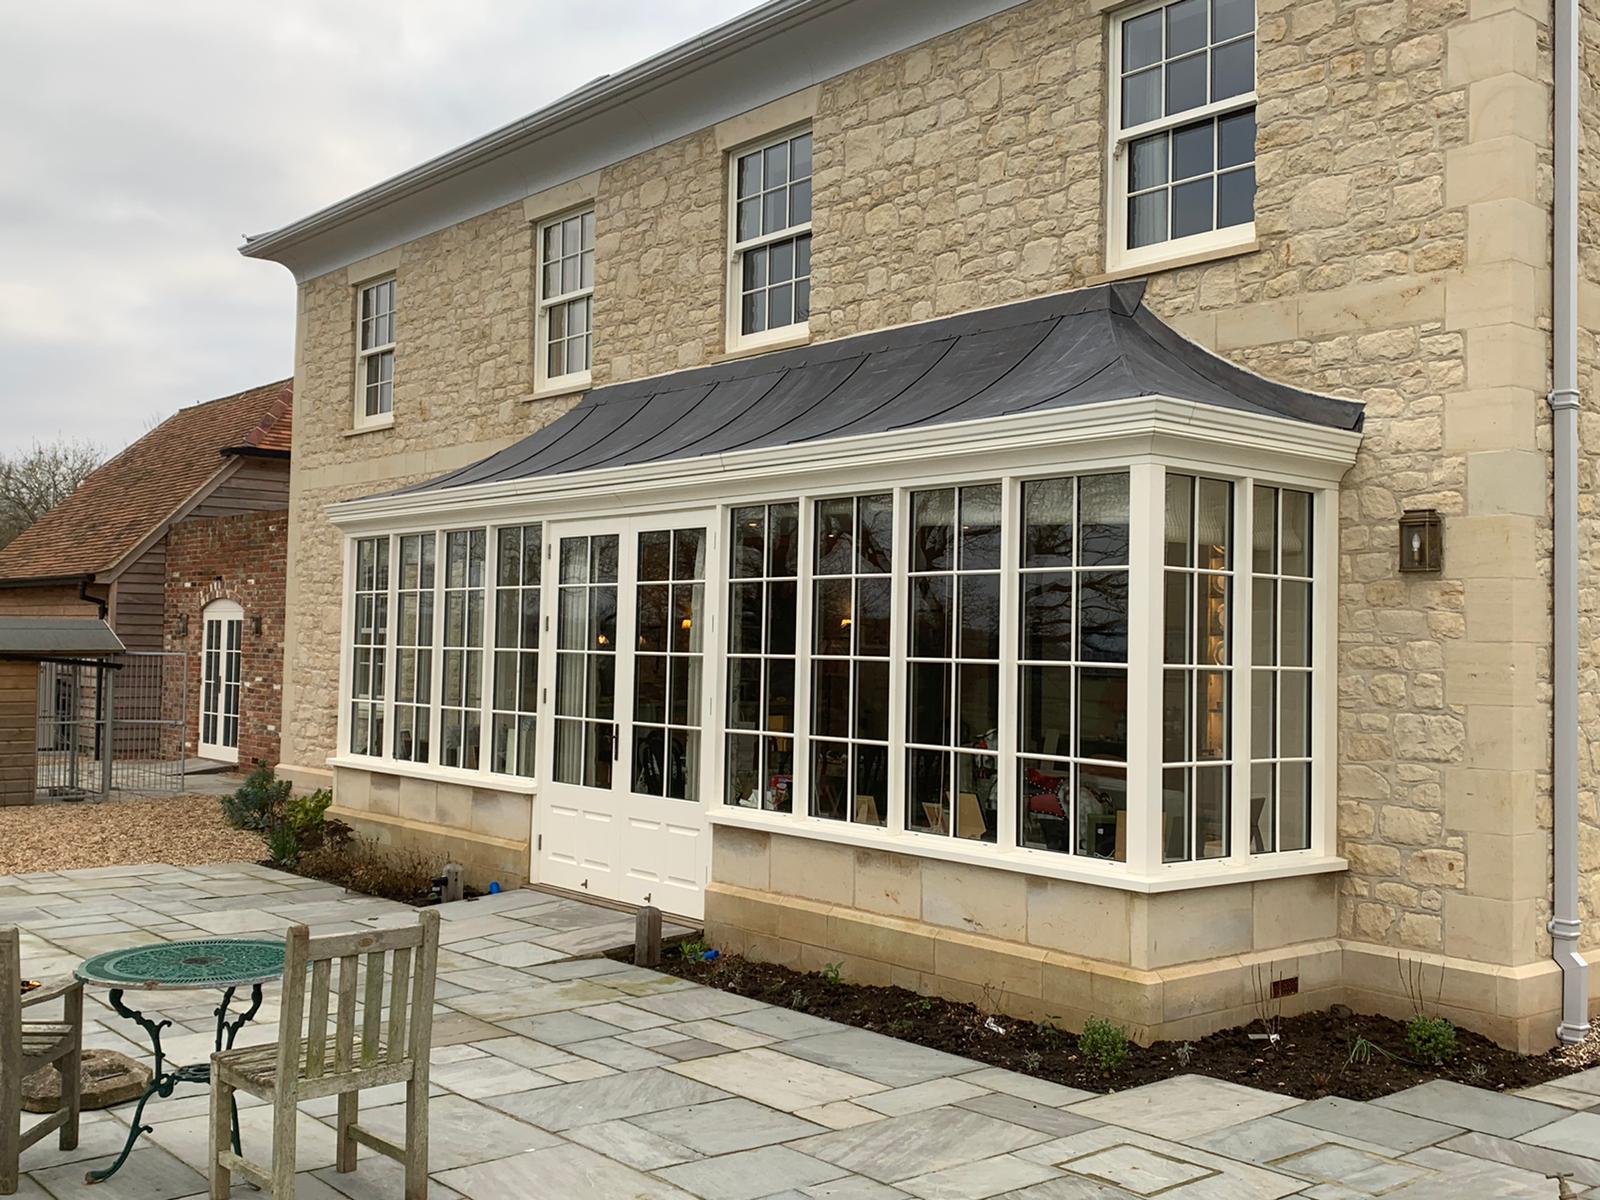 Bespoke timber conservatory by Kings Stag Joinery